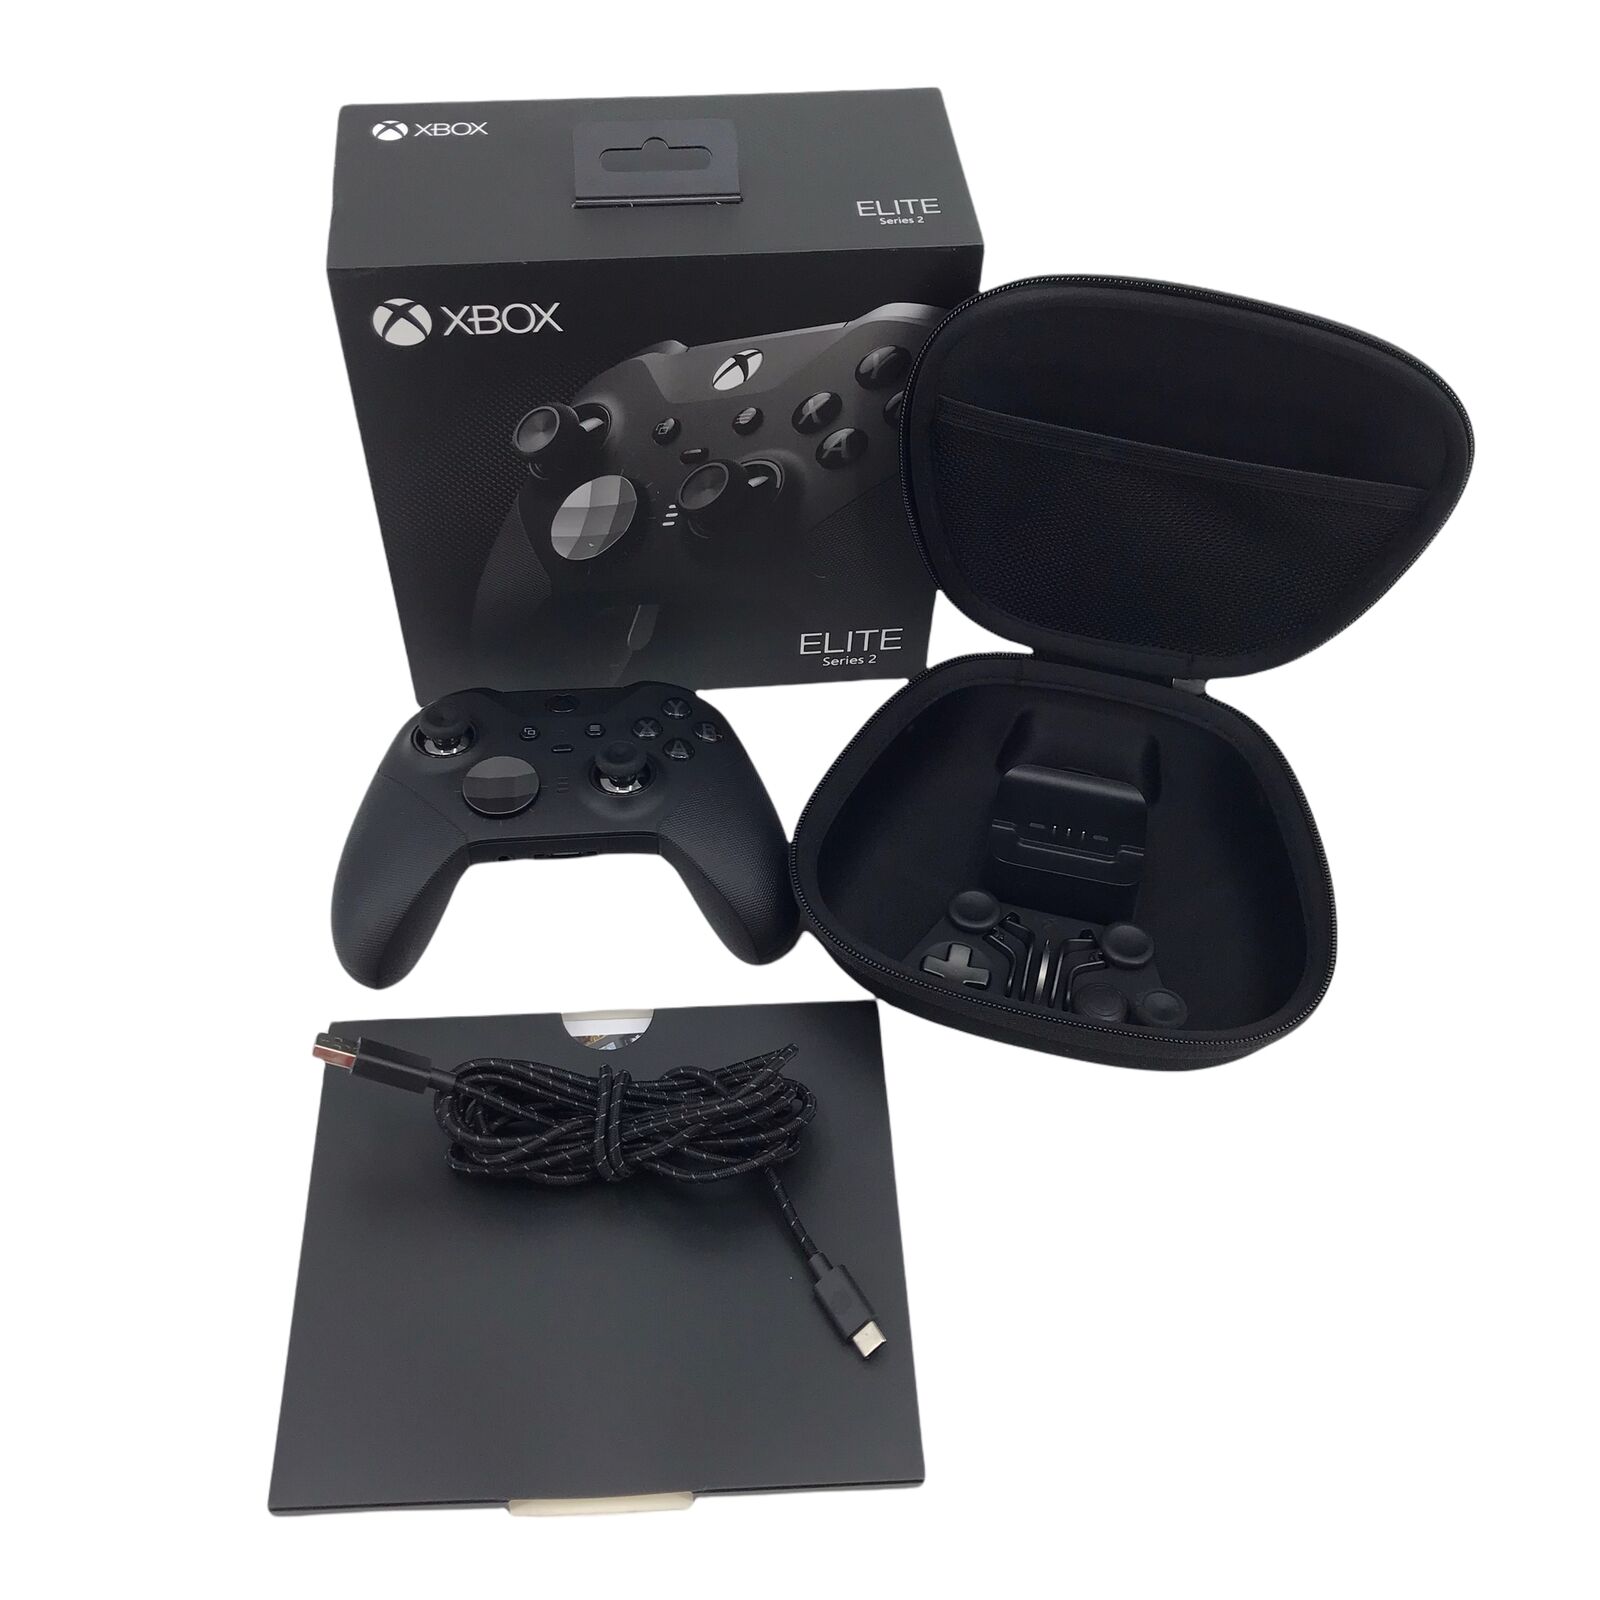 Microsoft Xbox Elite Series 2 Wireless Controller for Xbox One Black FST-00008 Used - image 1 of 2